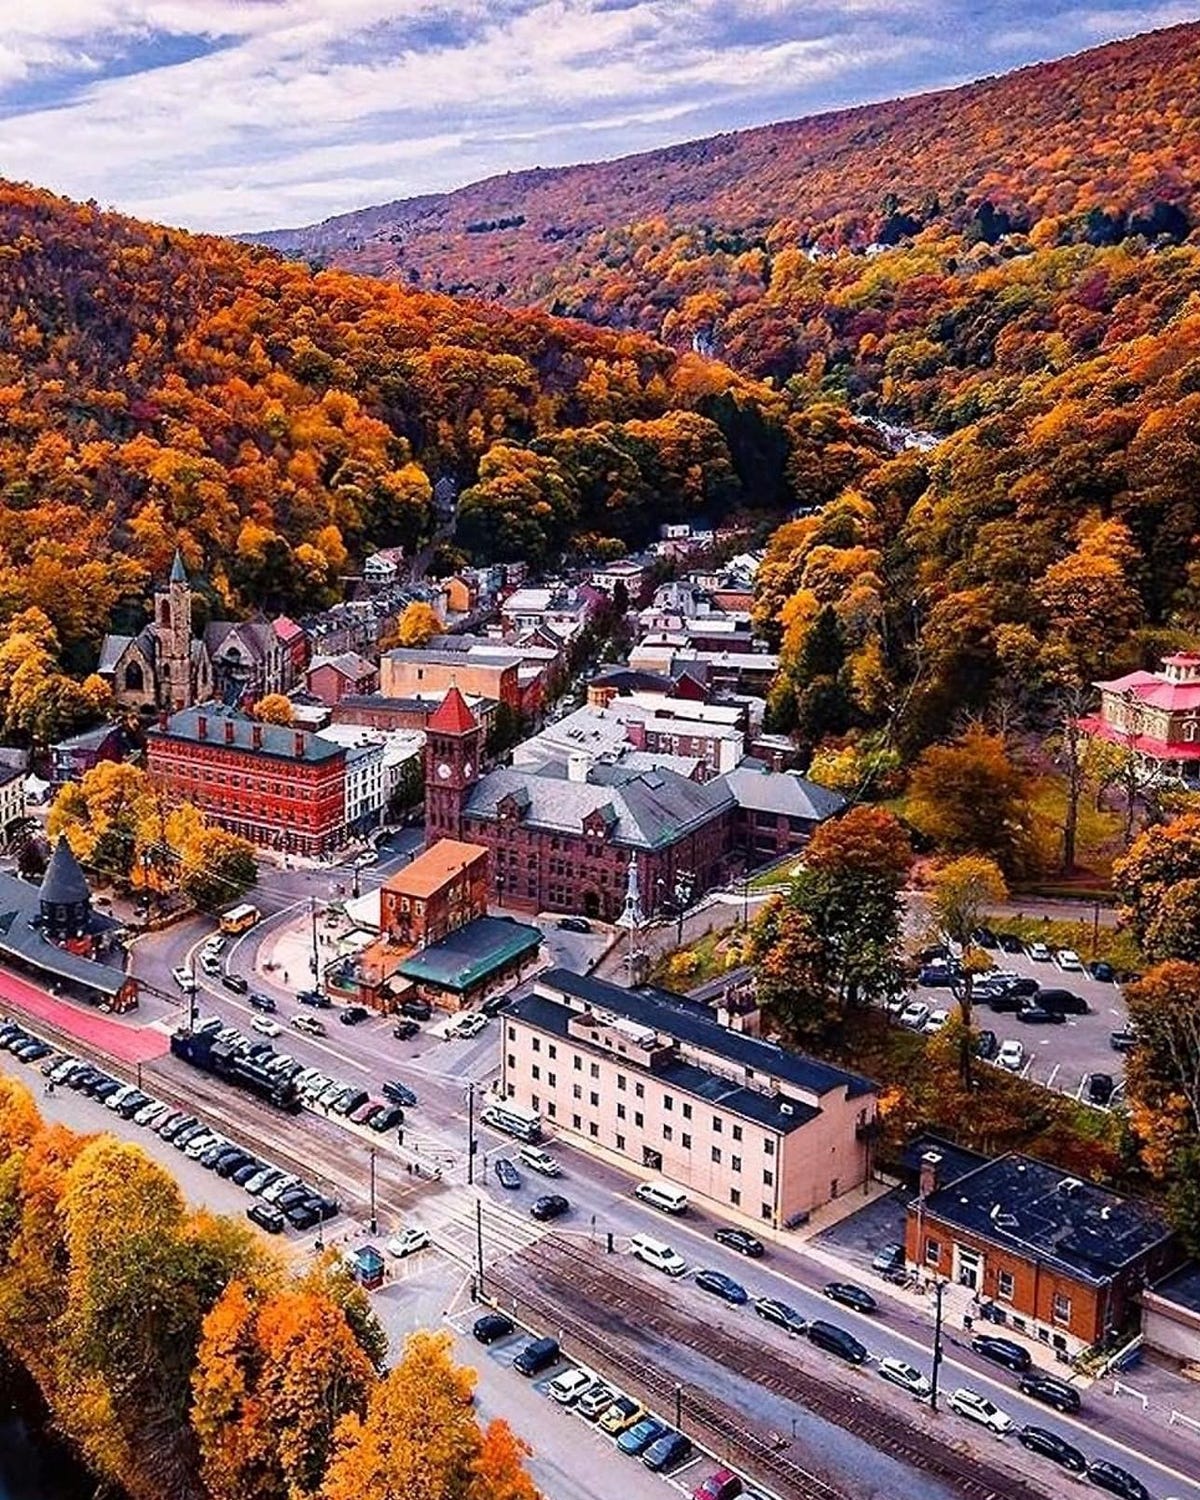 A gem of the Poconos, Jim Thorpe offers history and fun things to do